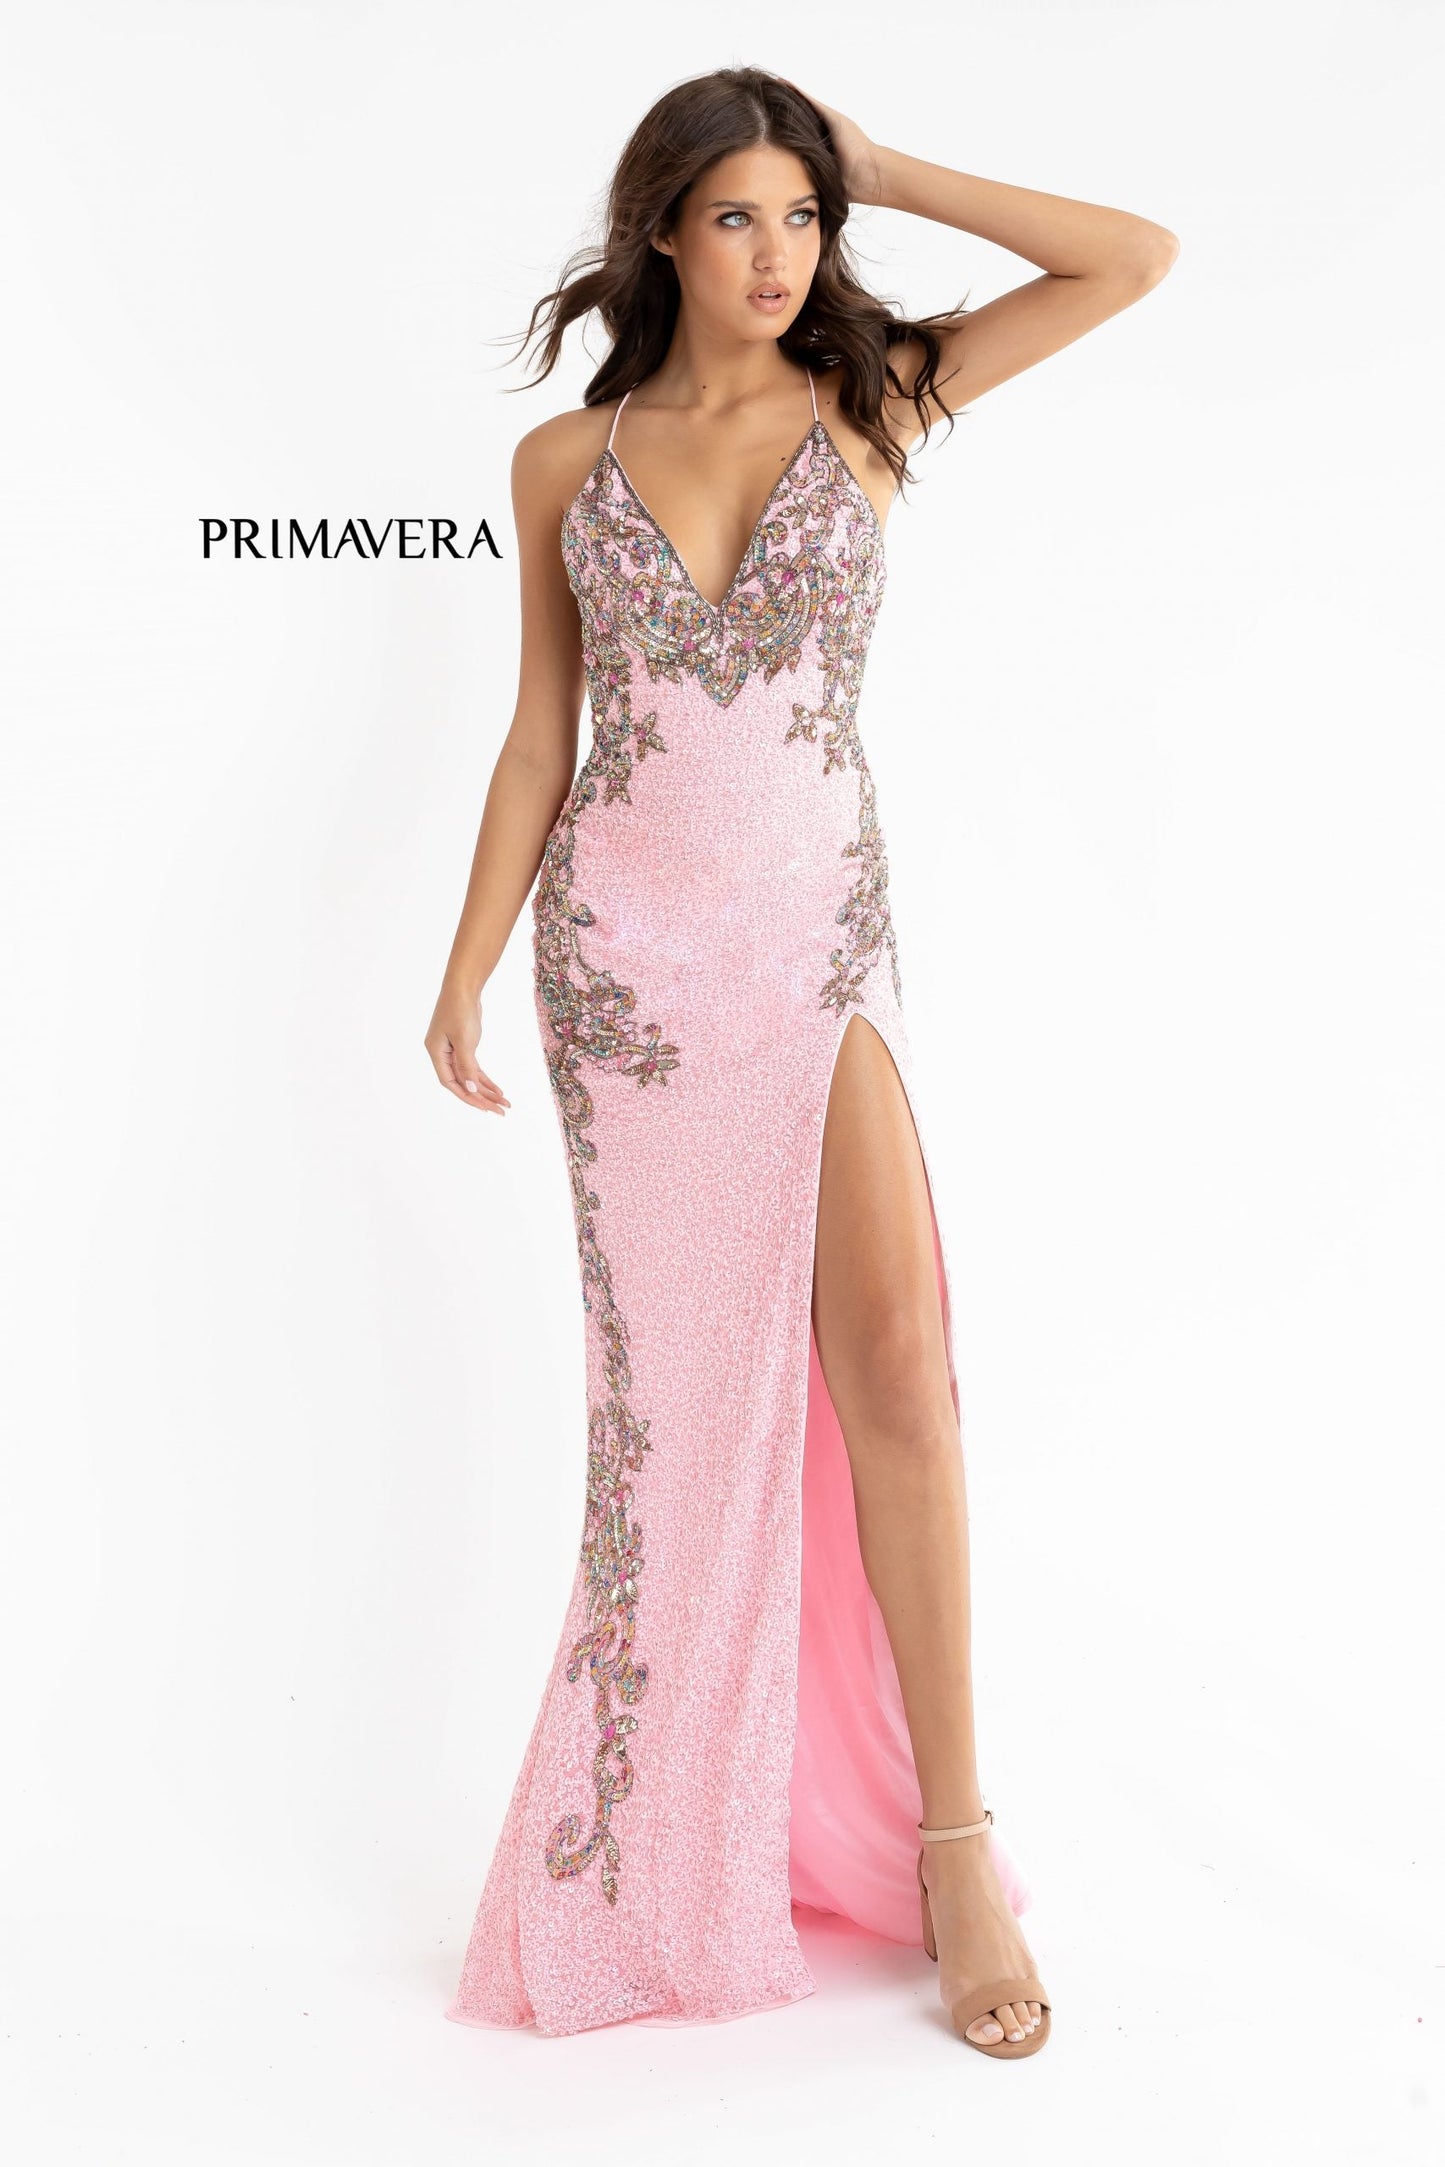 Primavera Couture 3211 Size 2 Baby Pink Sequin Prom Dress Pageant Gown Evening Formal Wear Side Slit